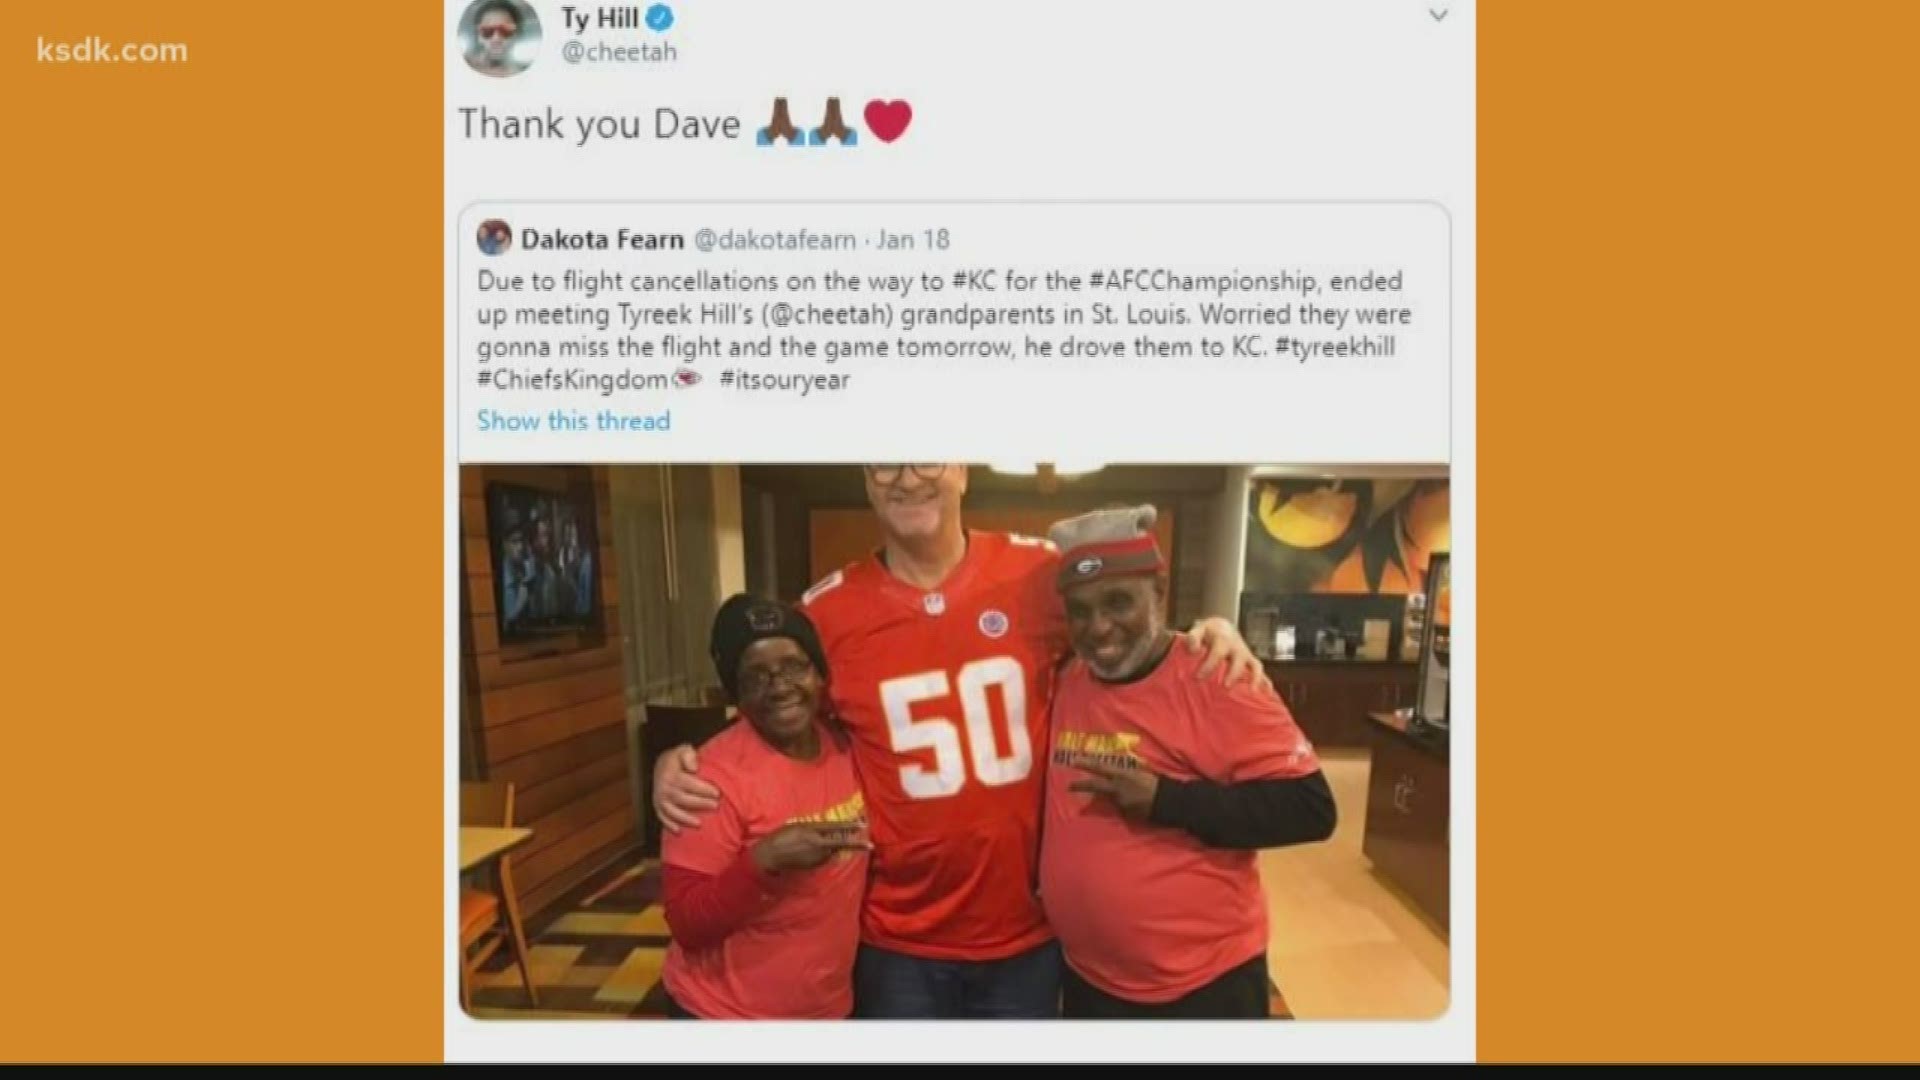 Dave Fearn did what any dedicated Chiefs fan would do. He drove Tyreek Hill's grandparents across Missouri so they could watch him in the AFC Championship game.